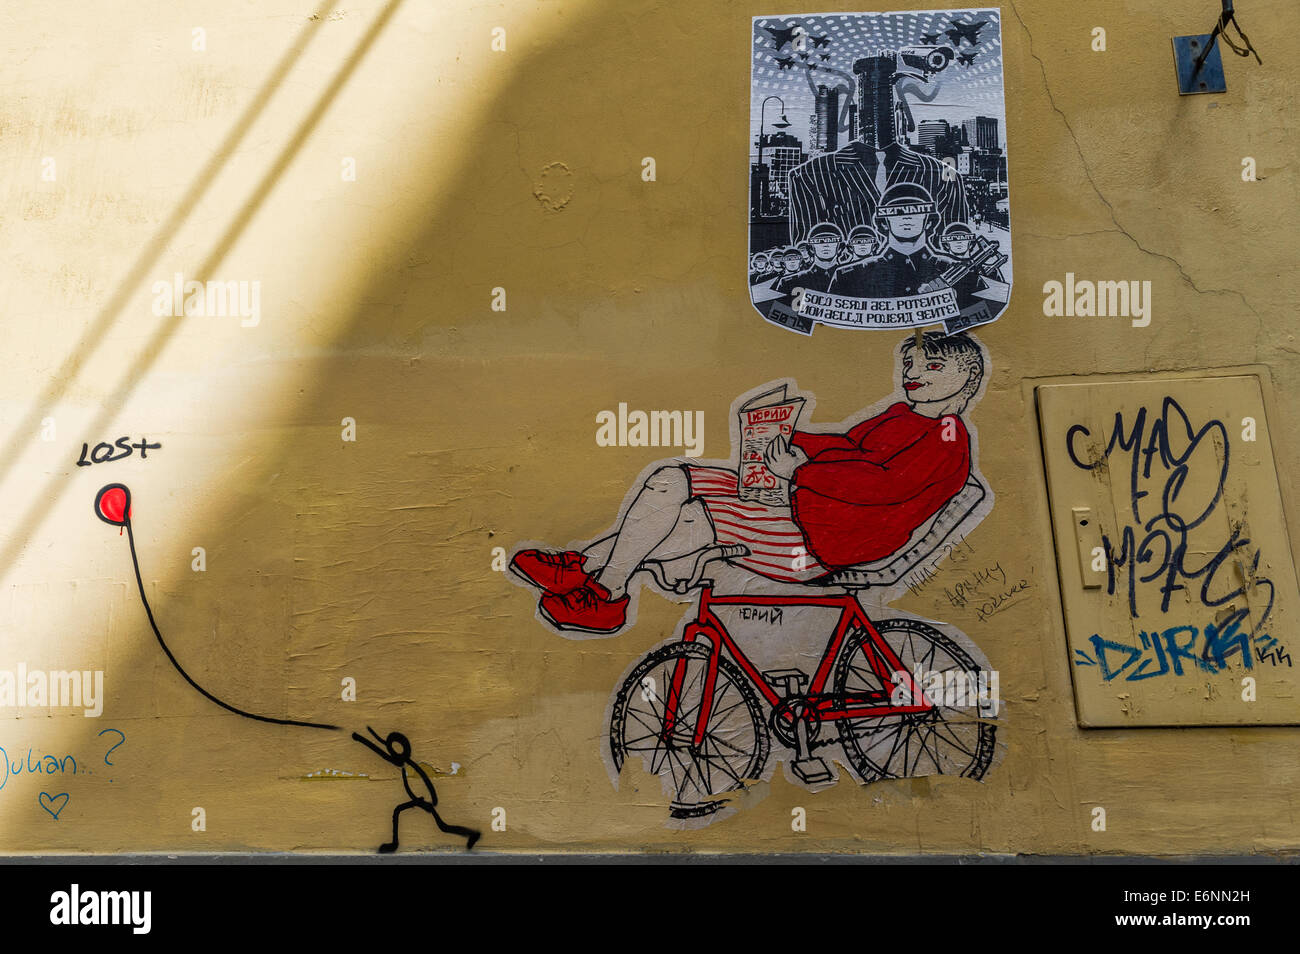 Political slogans and graffiti on a yellow wall in Florence, Italy. Stock Photo